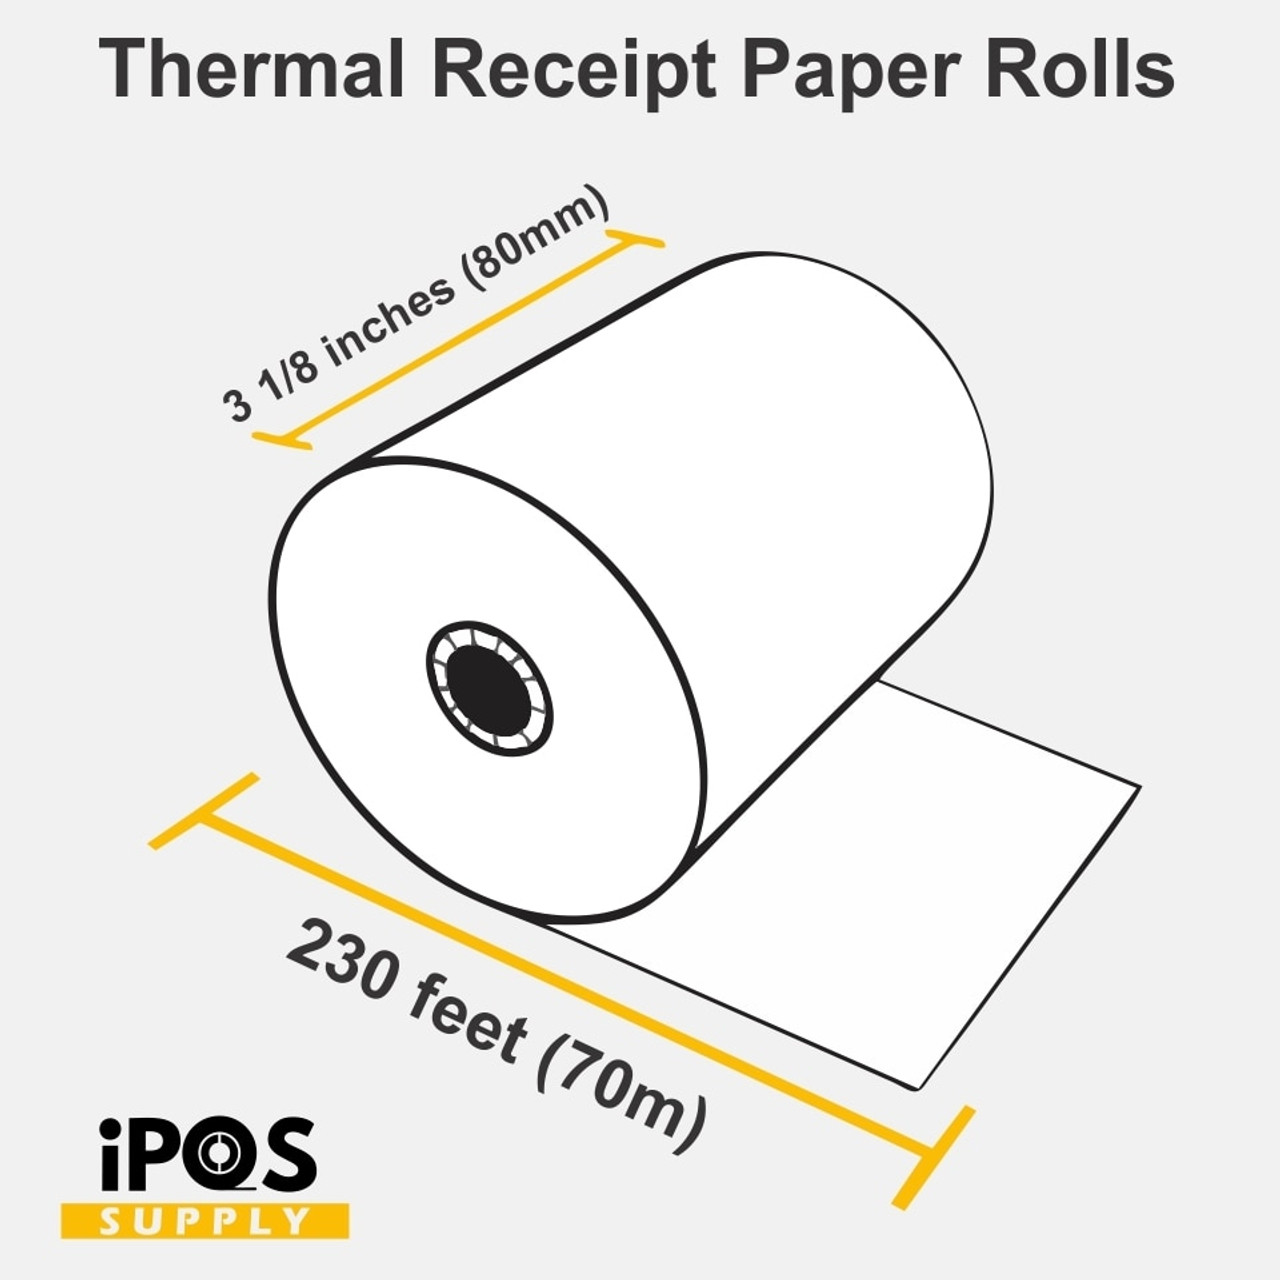 Epson Thermal Receipt Paper roll 3 1 8' x 230 - Box with 48